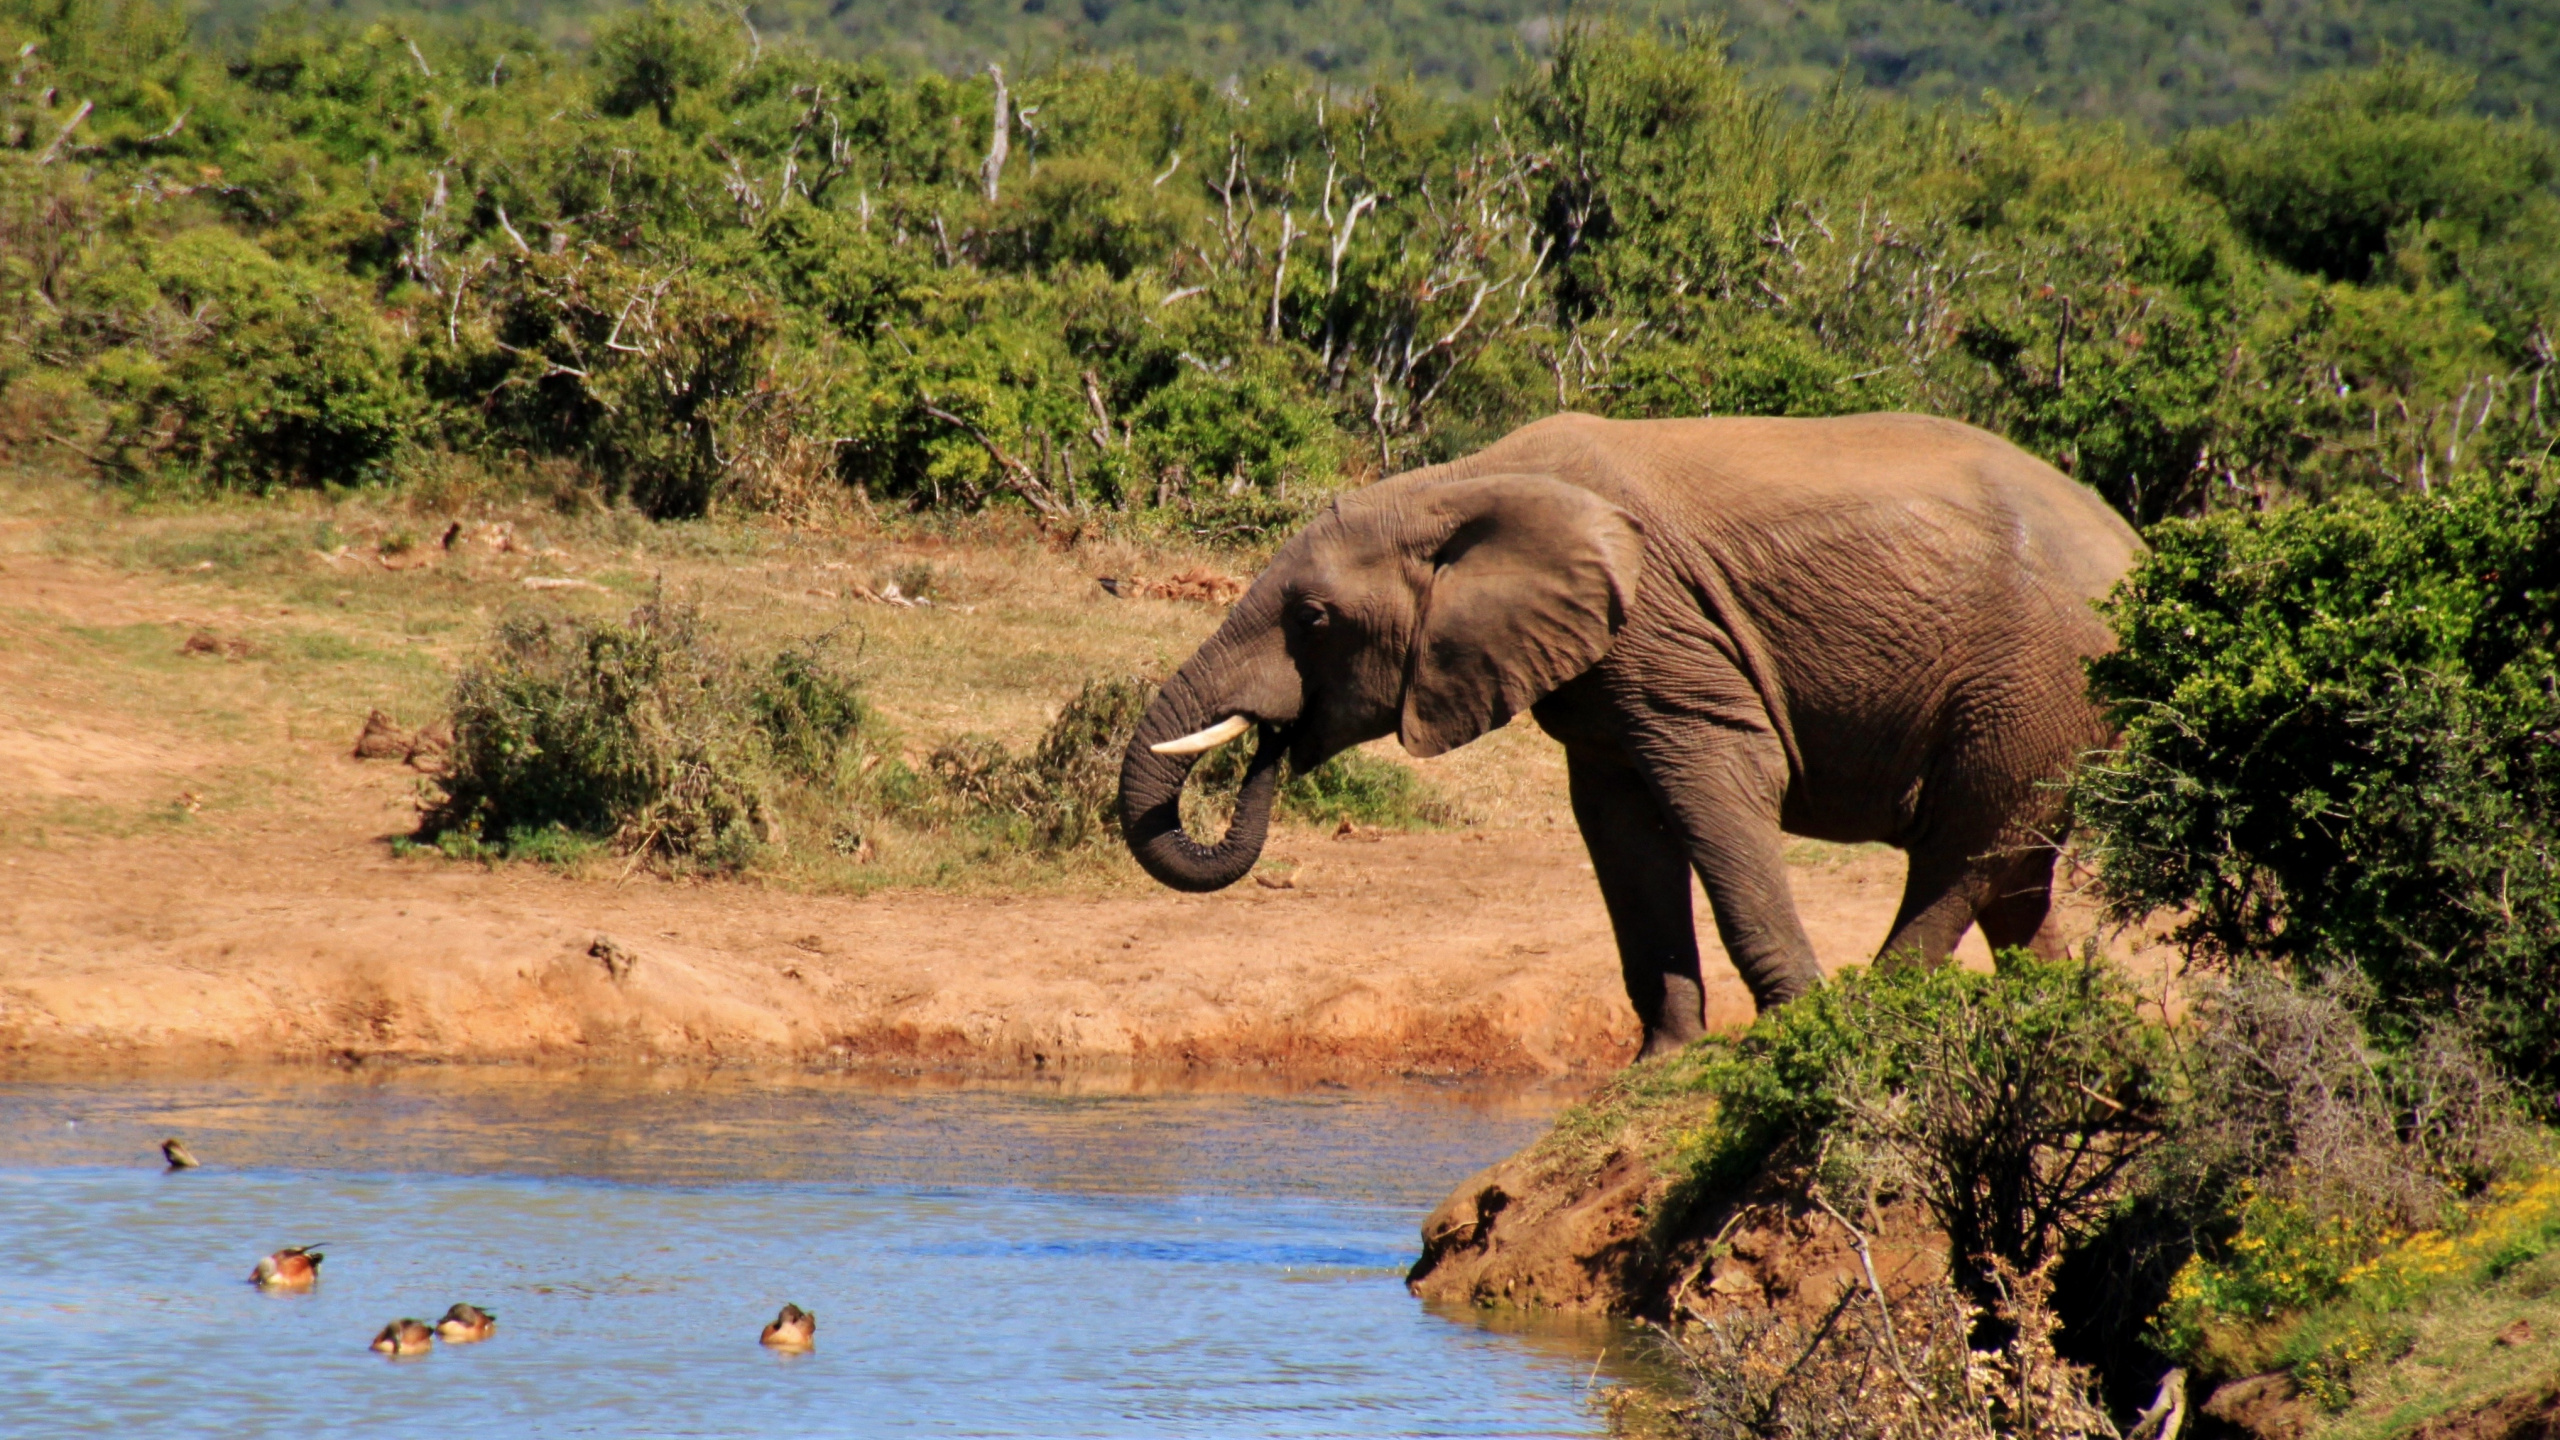 Elephant Drinking Water on River During Daytime. Wallpaper in 2560x1440 Resolution